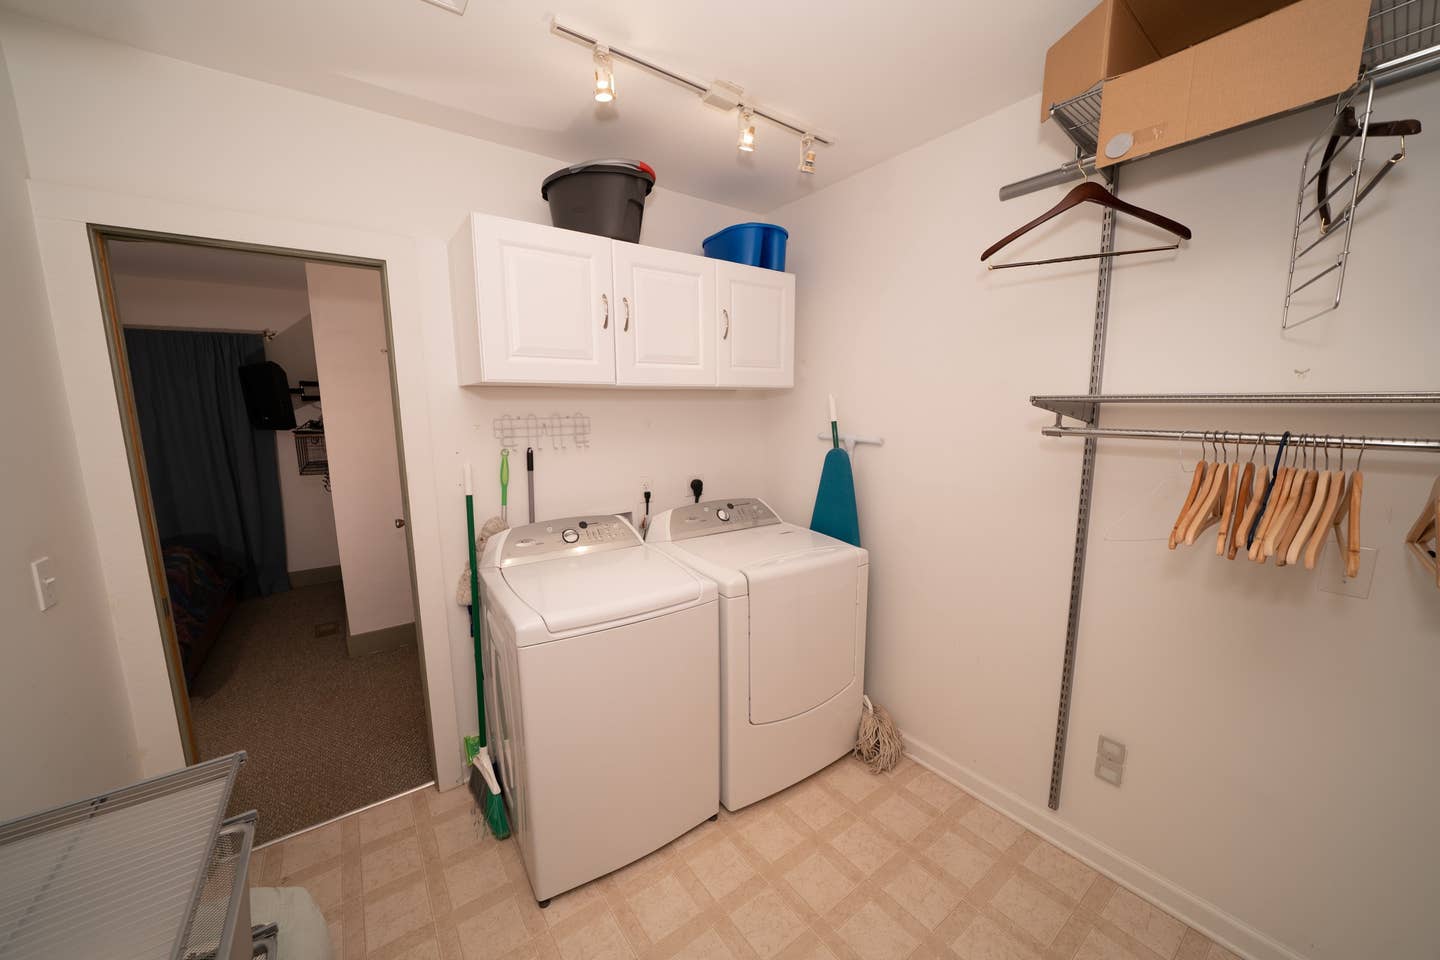 Washer and dryer are available to guests